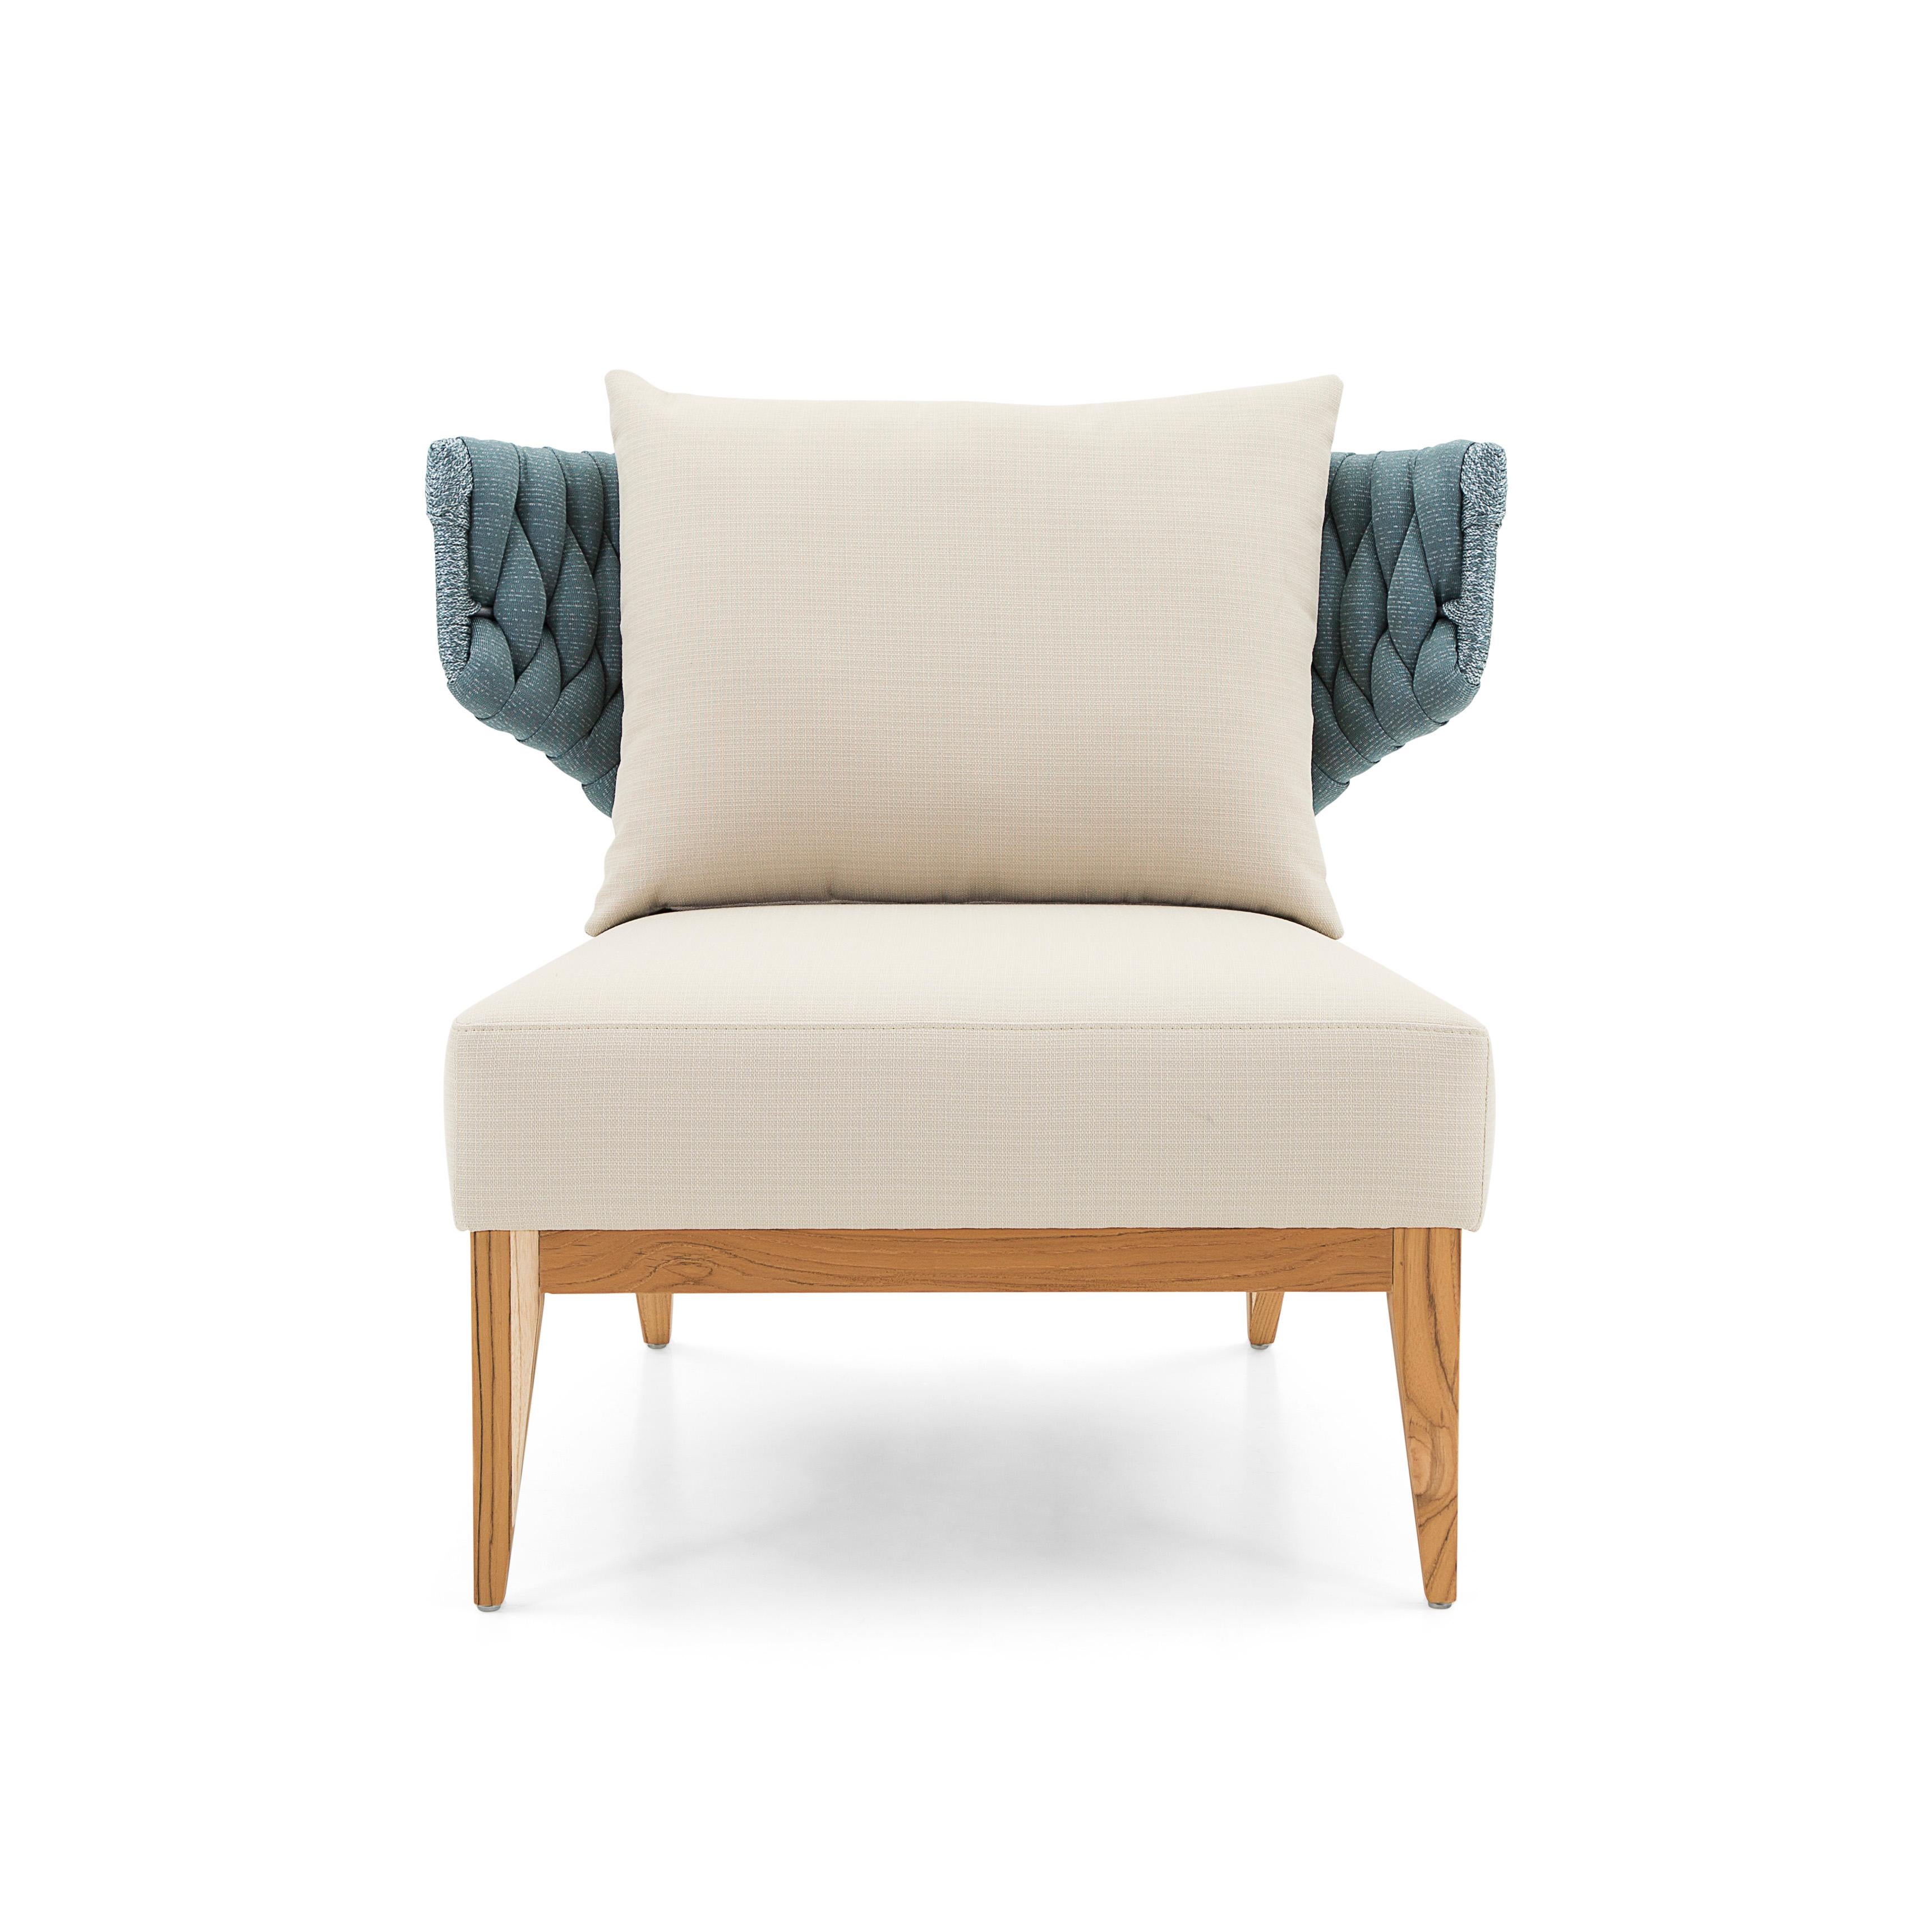 The Beluga chair is the perfect combination of a beige fabric covering the seat and pillow and a blue fabric for the back, with wood legs in a teak finish to match with this contemporary design. Uultis have designed this incredible armchair to give